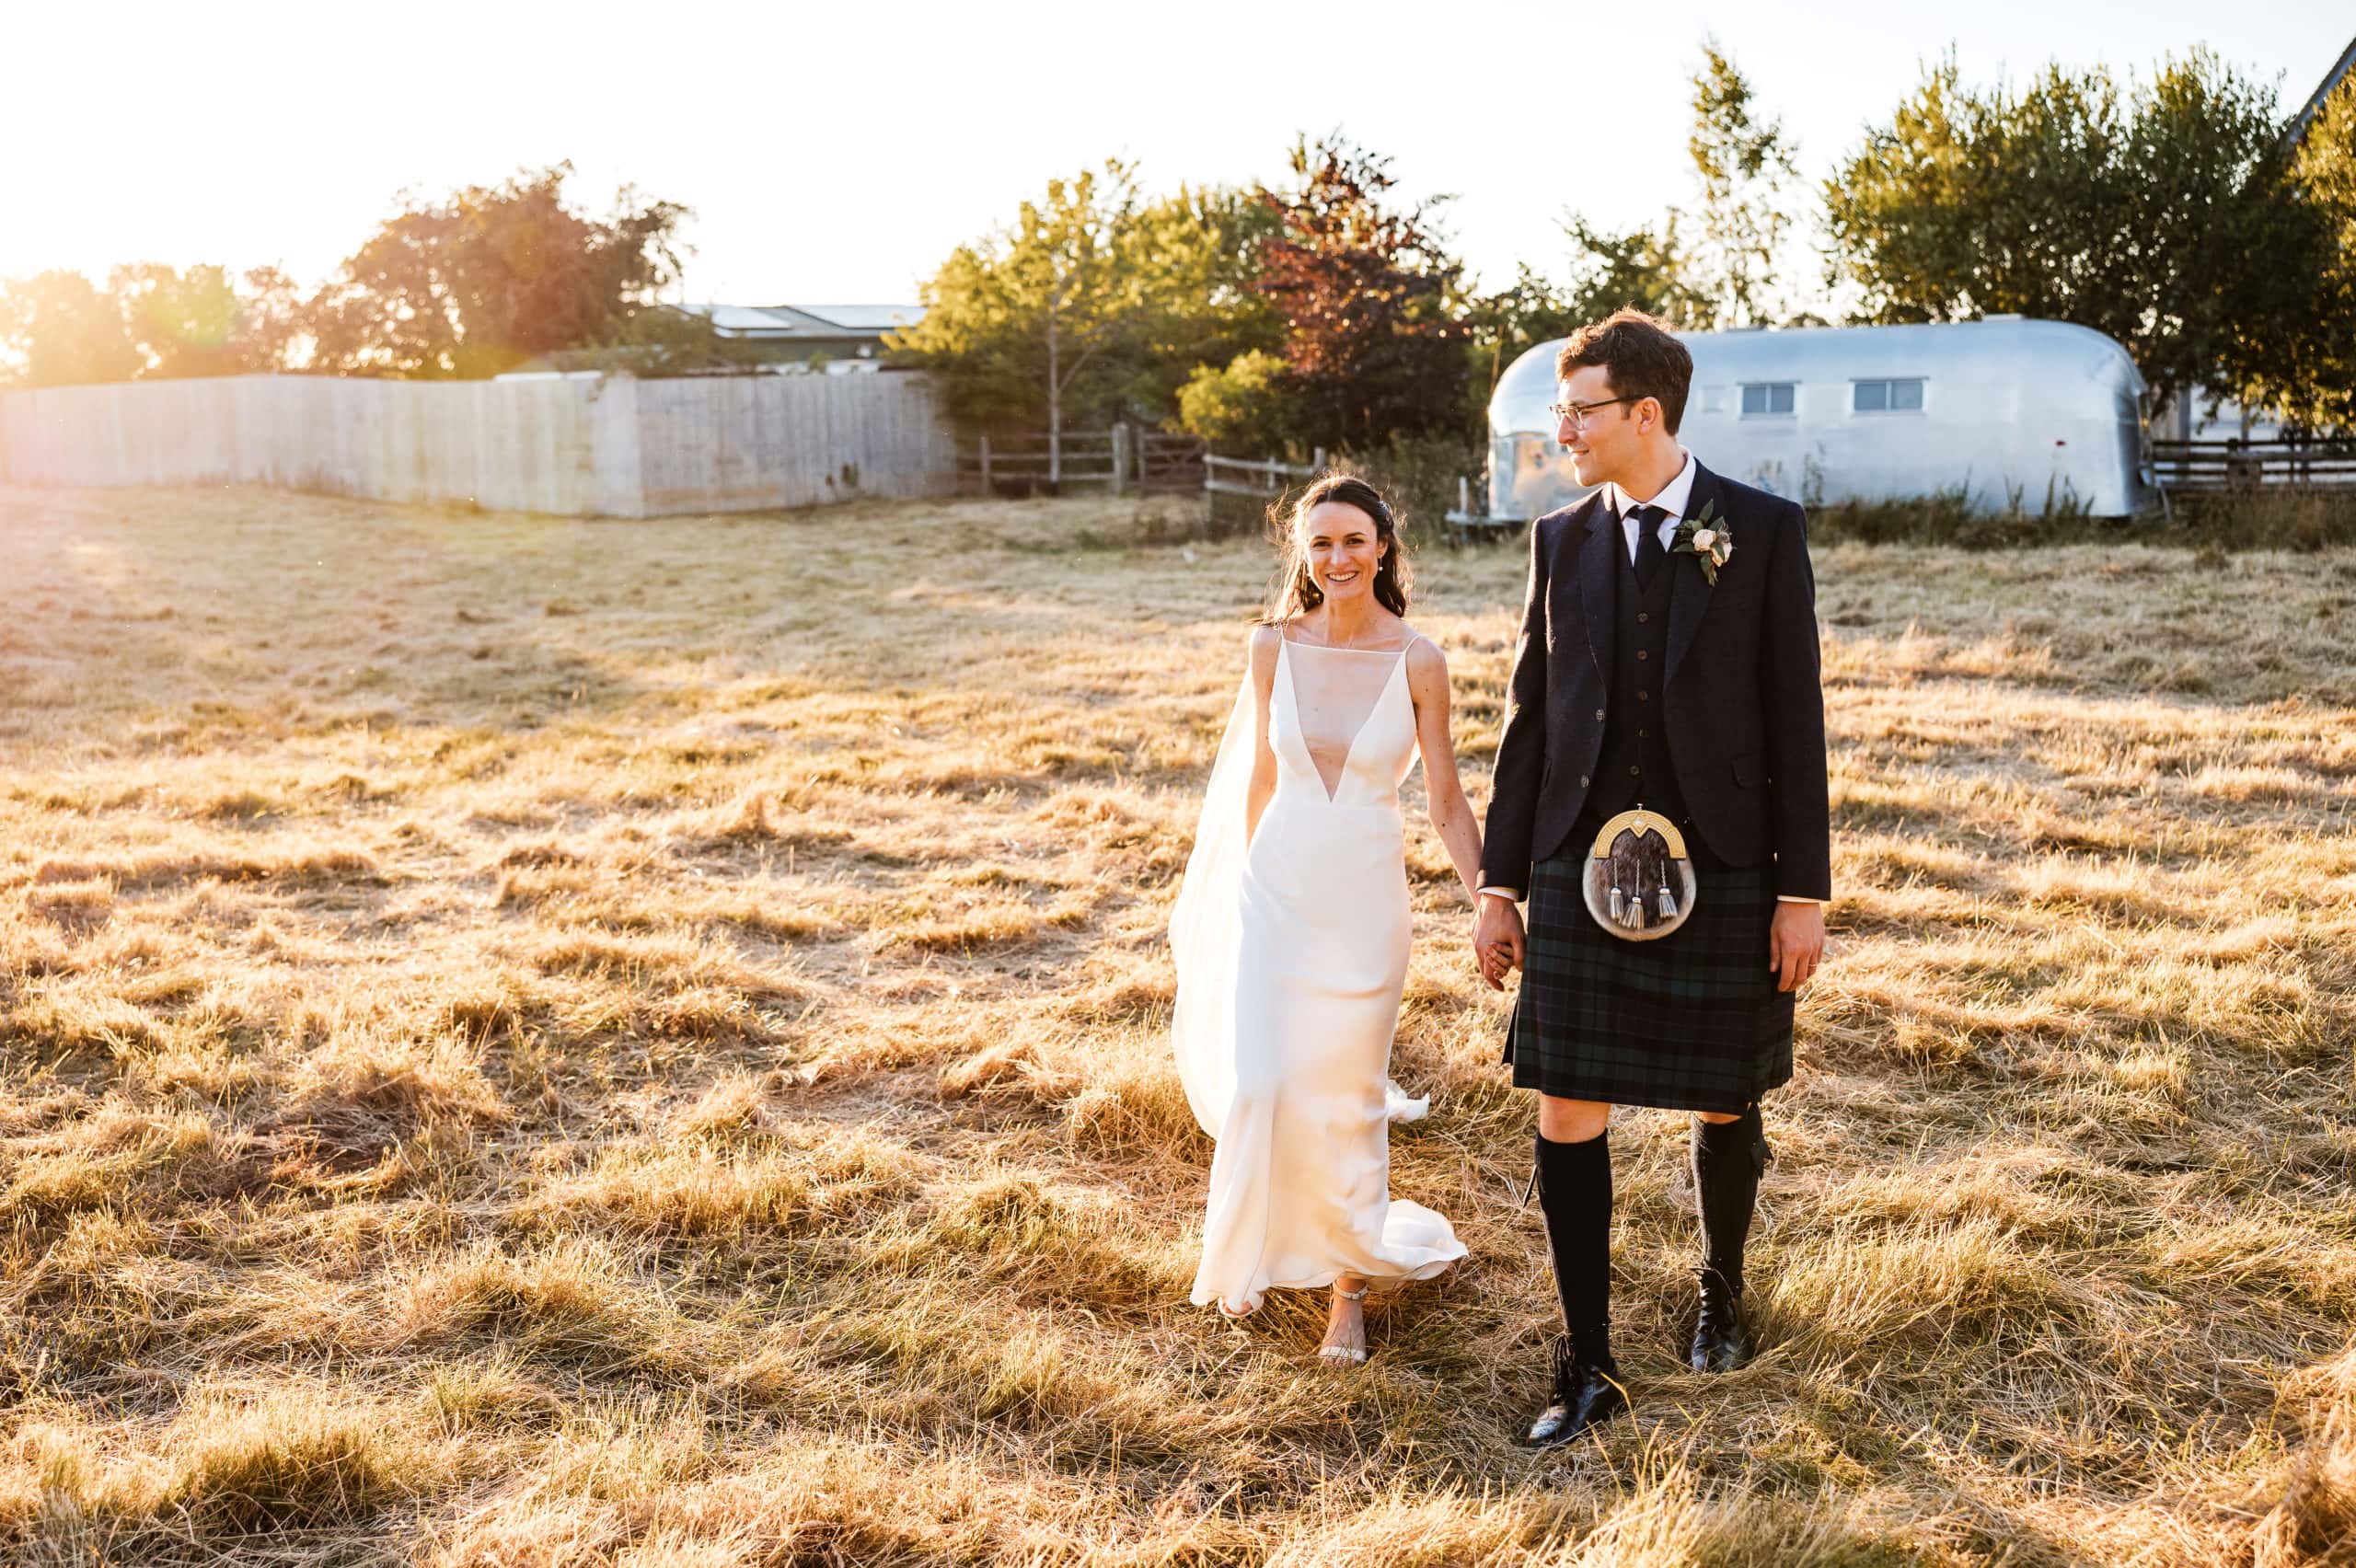 Groom wearing a kilt holding hands with bride in a hay field at sunset